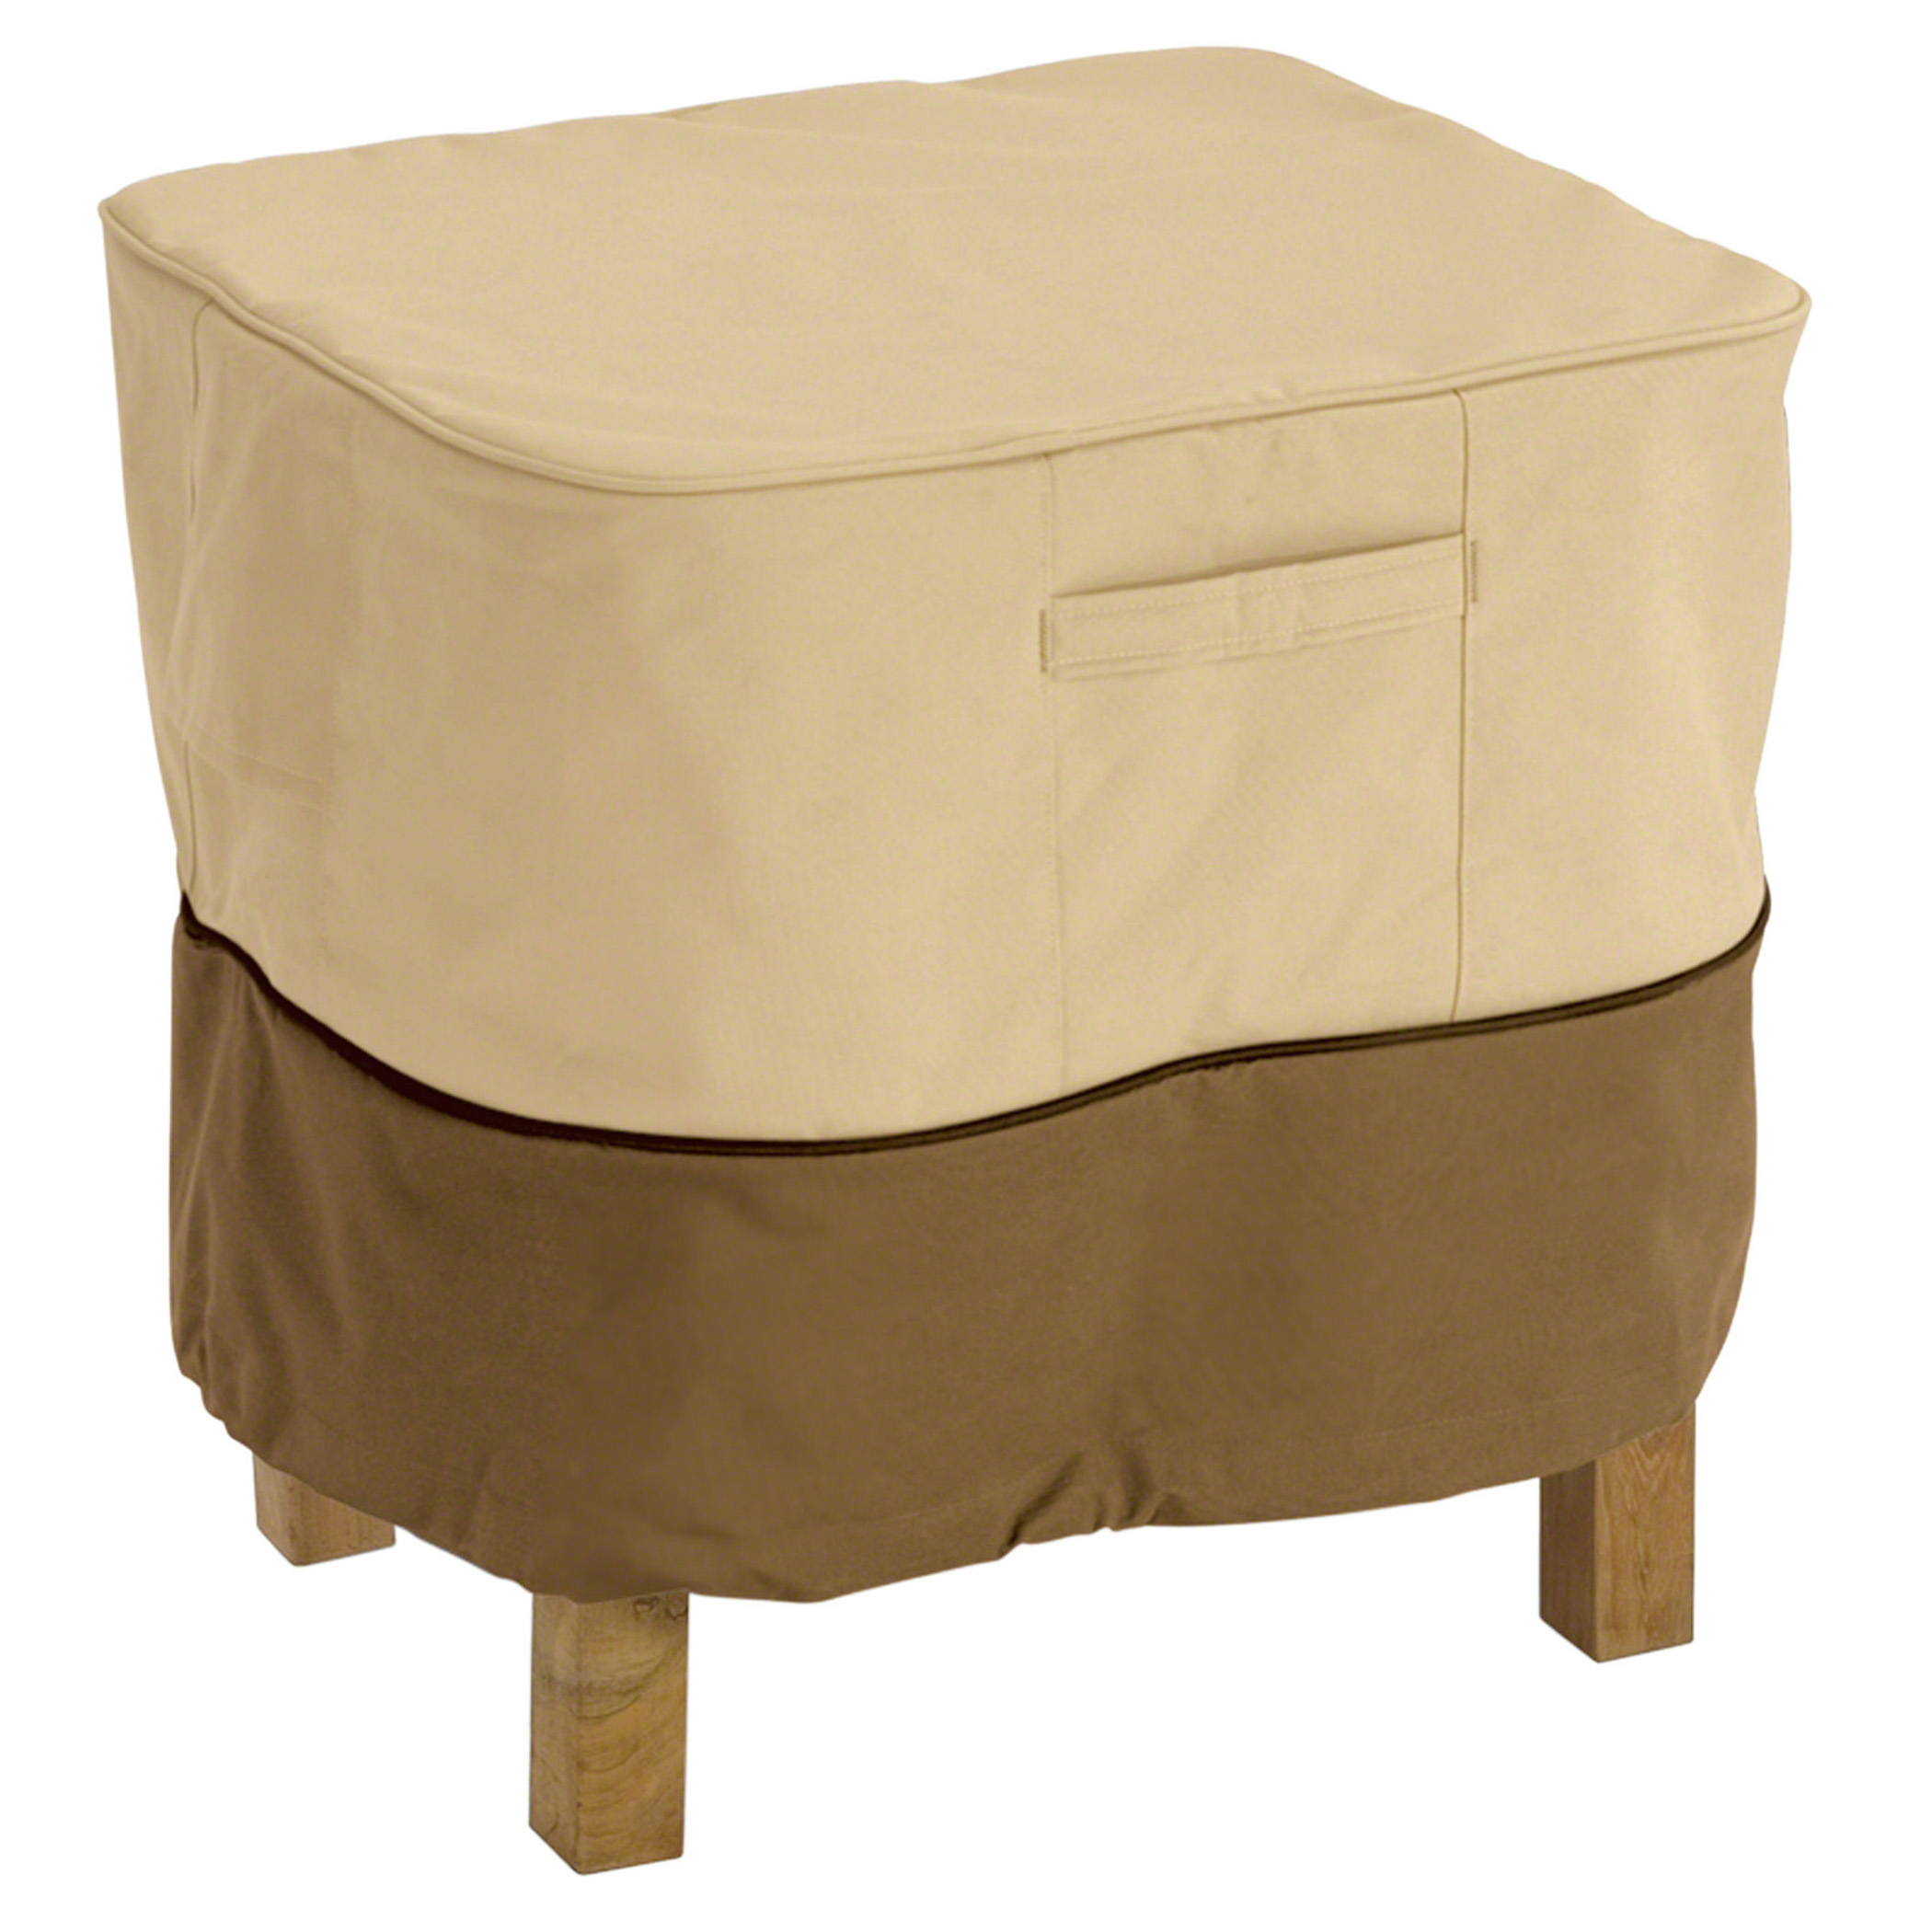 Classic Accessories Veranda™ Square Patio Ottoman/Side Table Cover - Durable and Water Resistant Outdoor Furniture Cover, Small (70972) - image 1 of 11